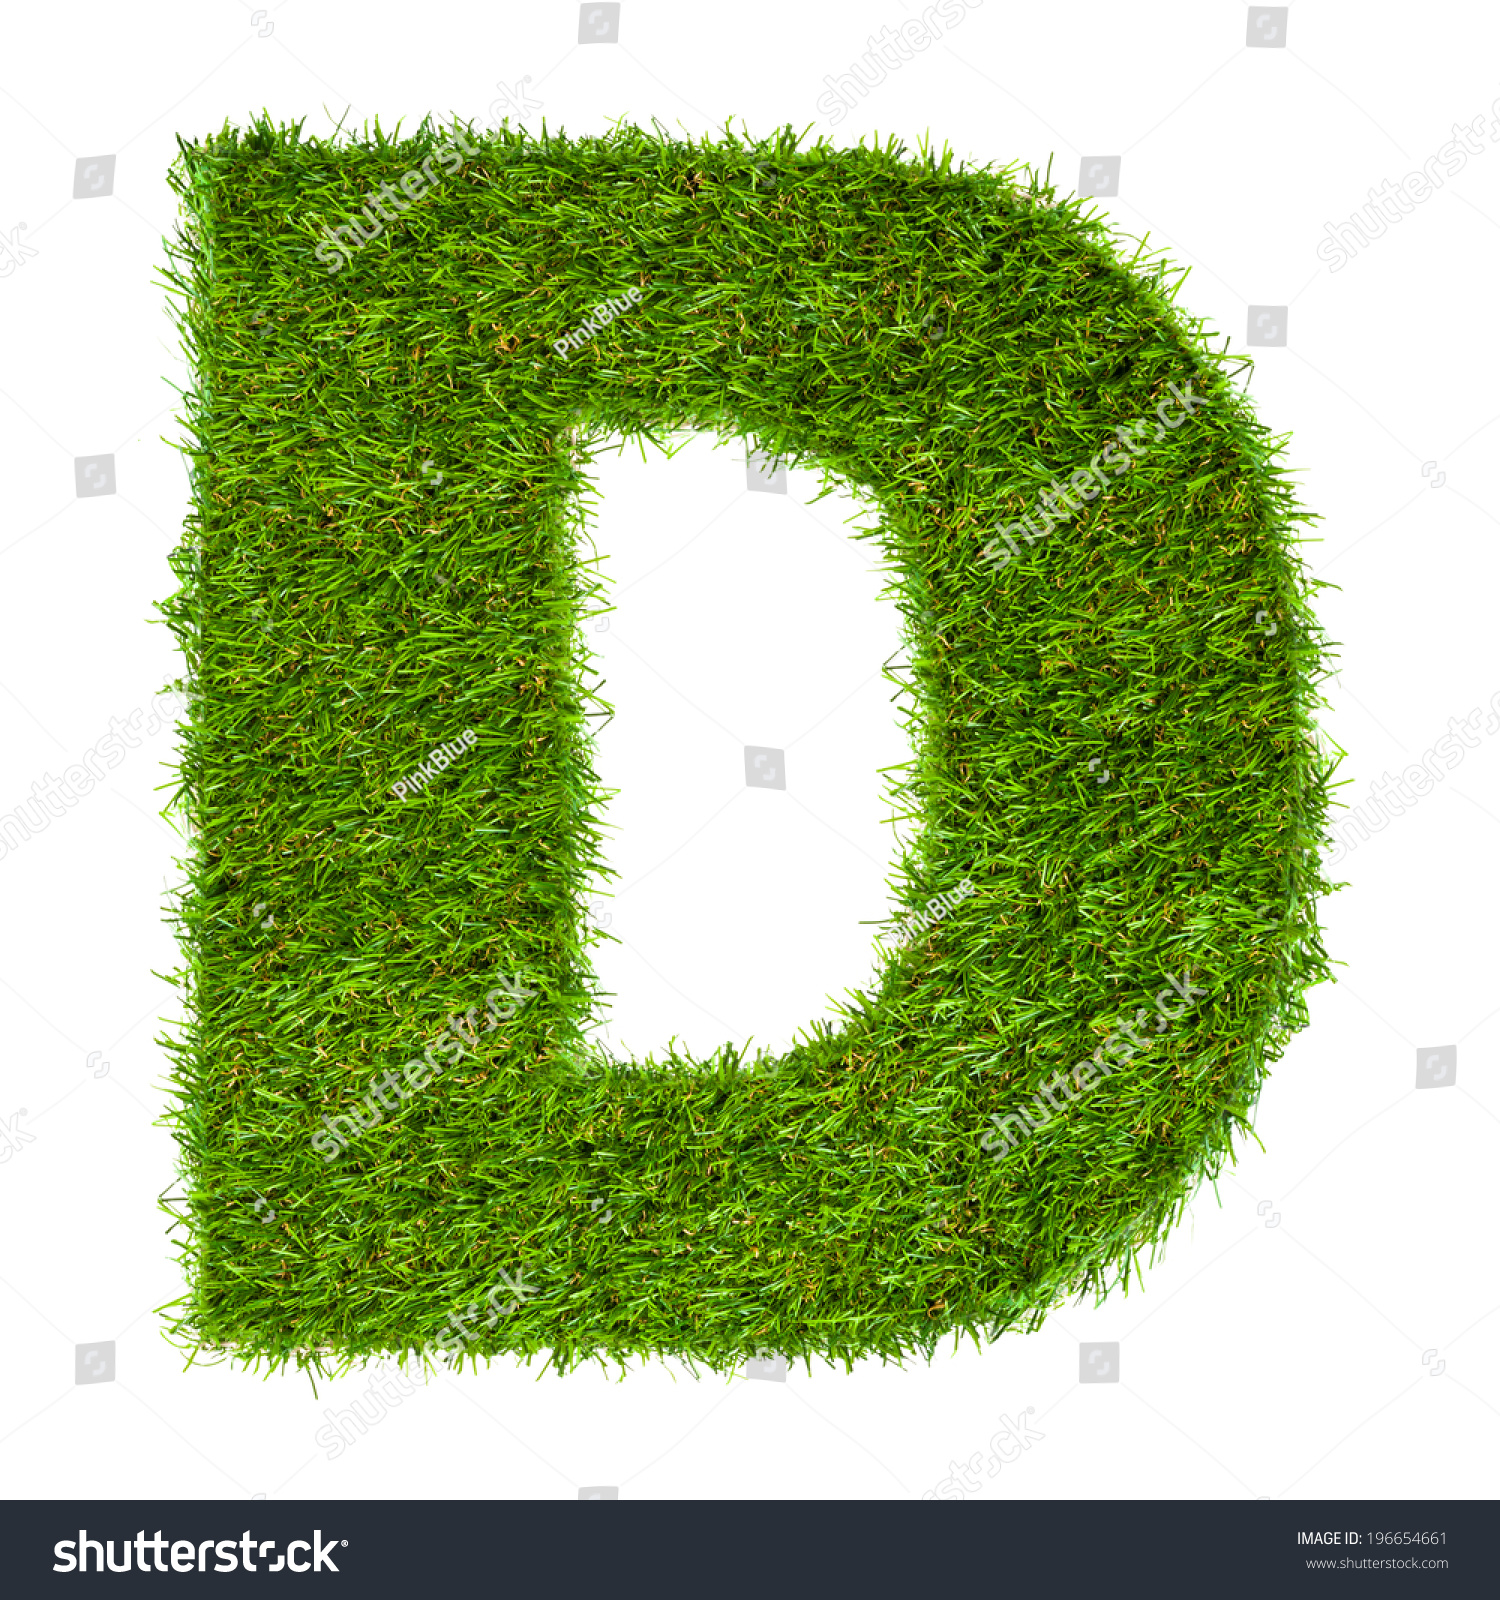 Letter D Made Green Grass Isolated Stock Photo 196654661 - Shutterstock